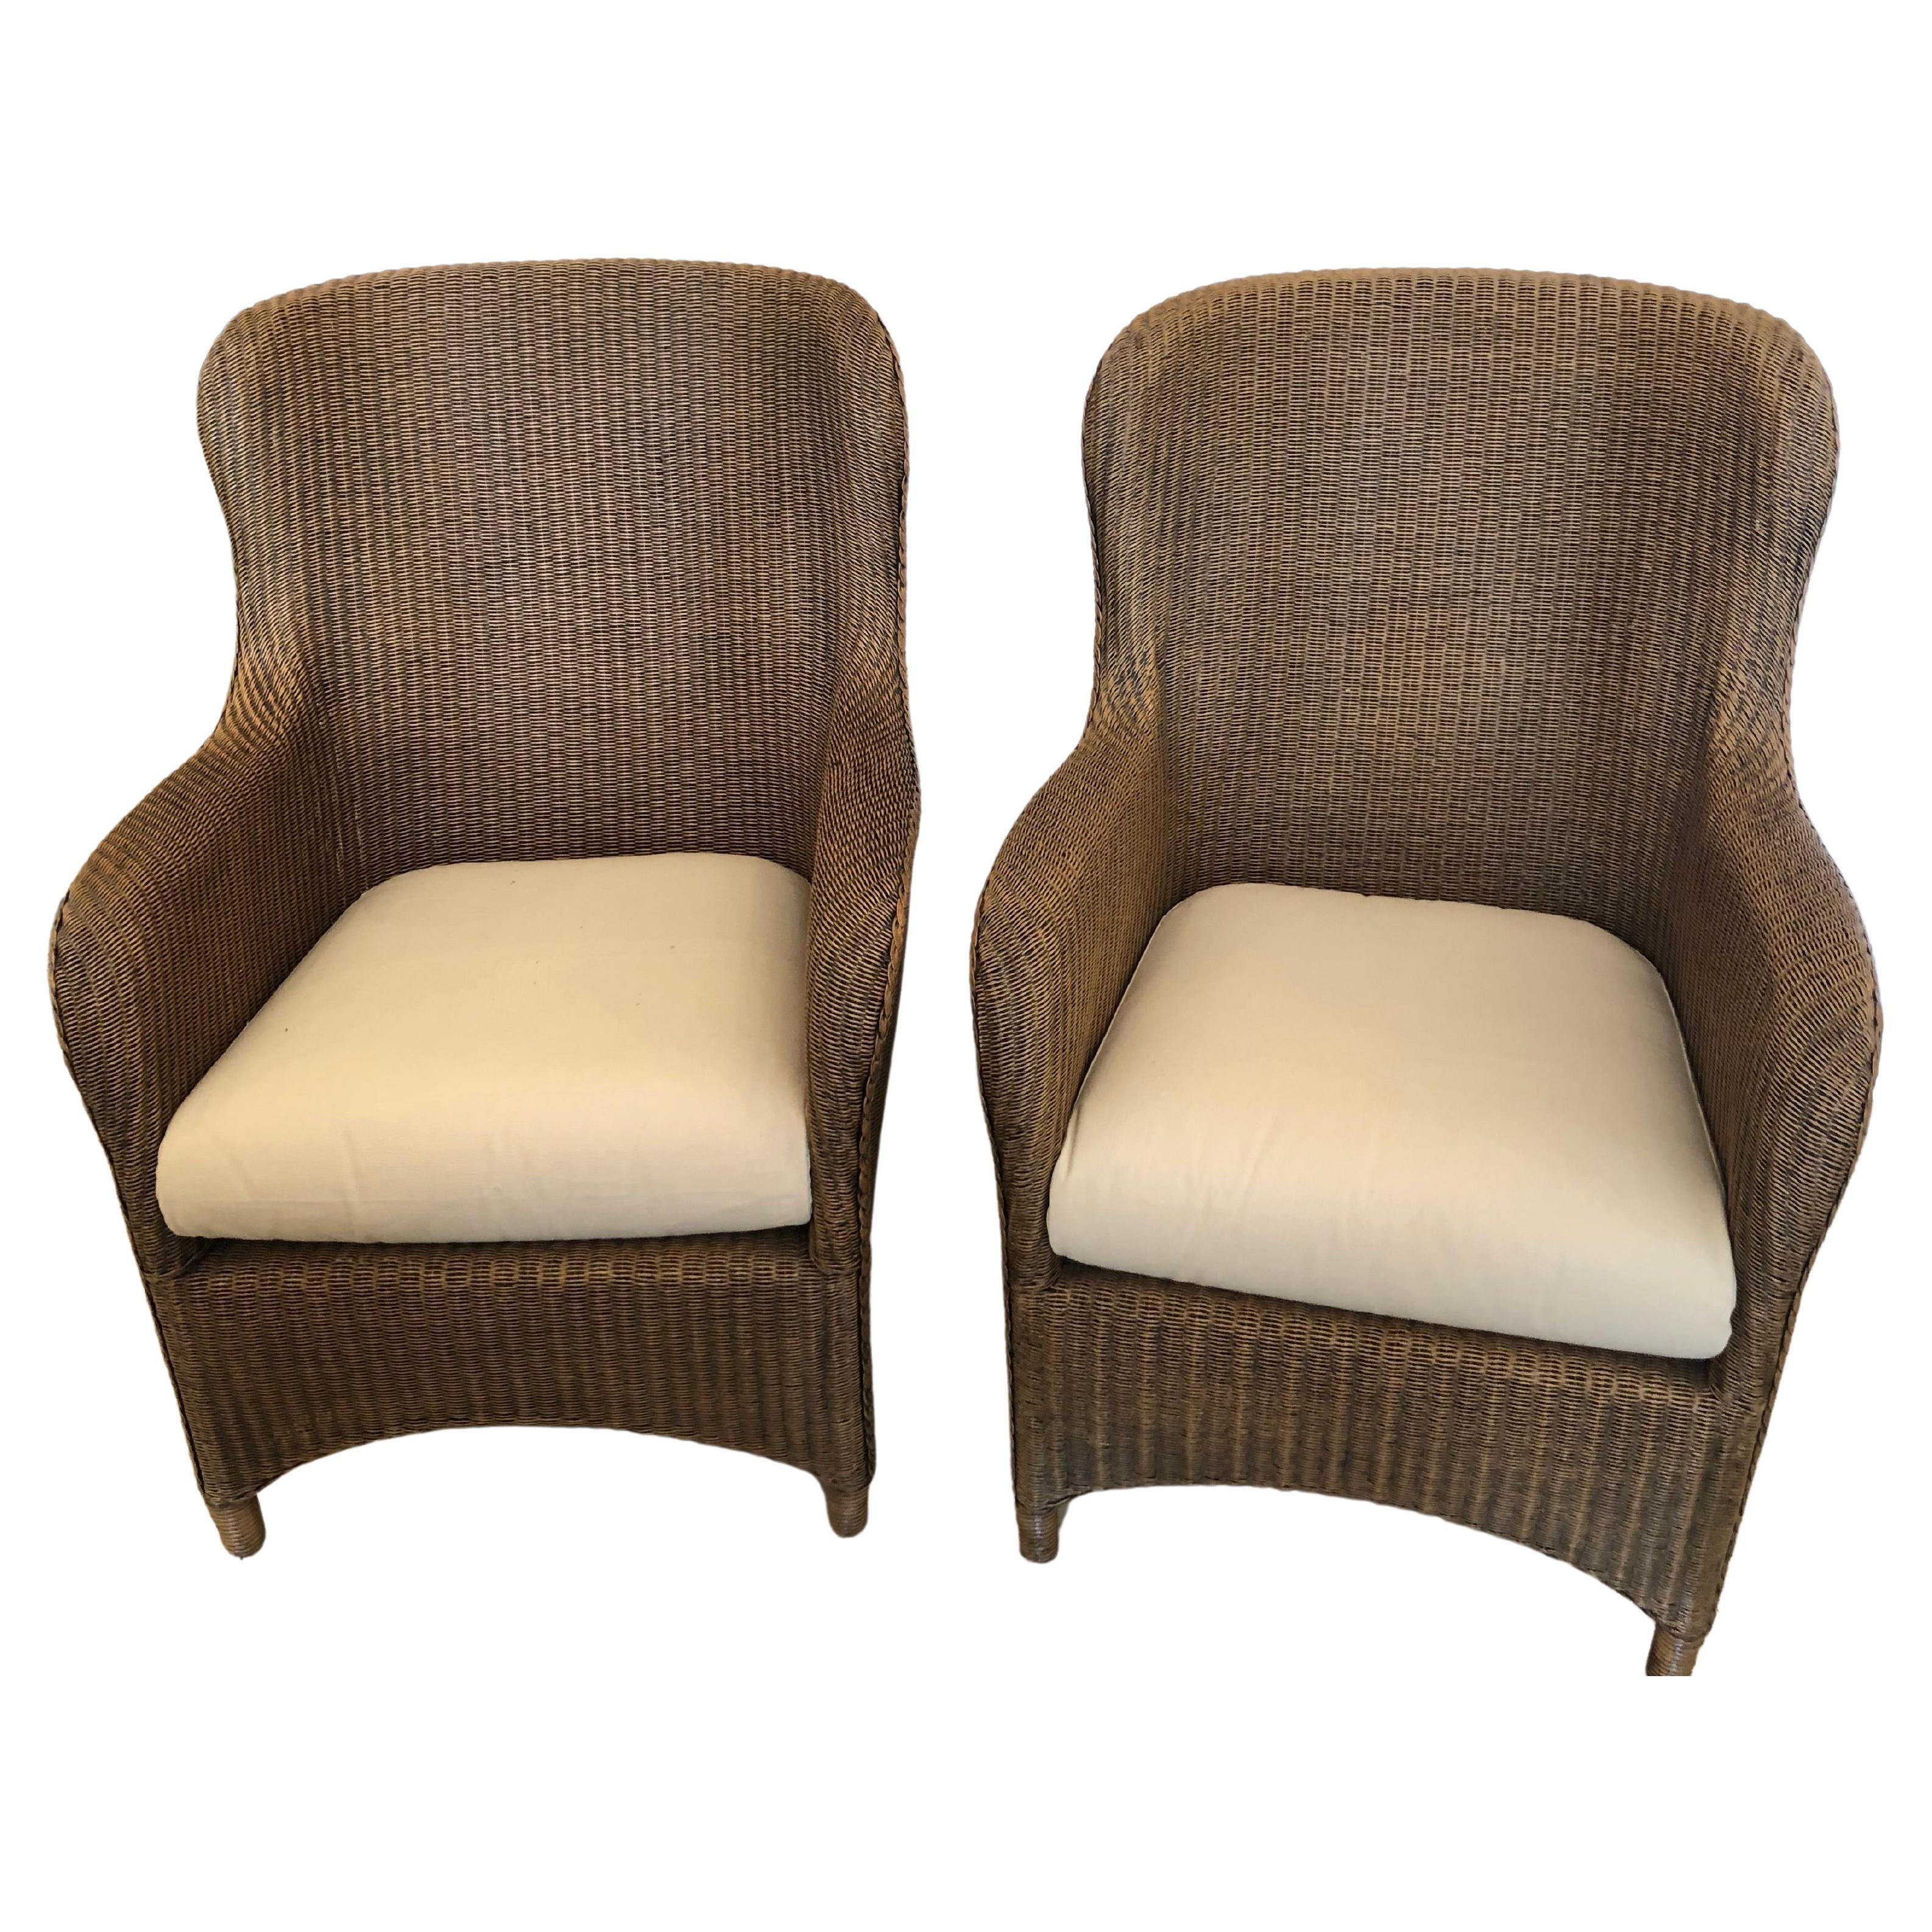 Sensational Pair of Large Curvy Natural Brown Wicker Lounge Club Chairs